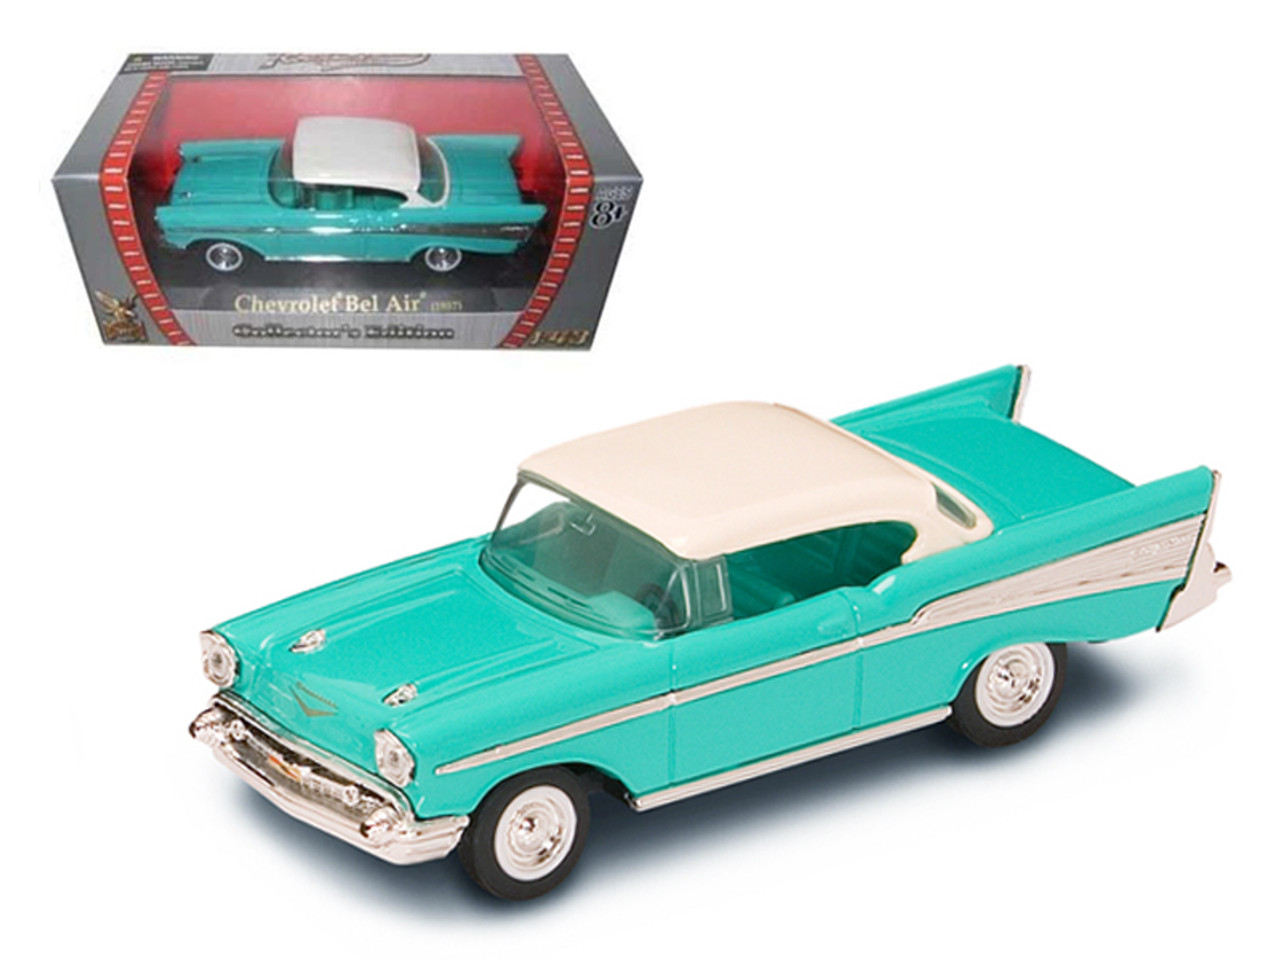 1957 Chevrolet Bel Air Turquoise 1/43 Diecast Model Car by Road Signature